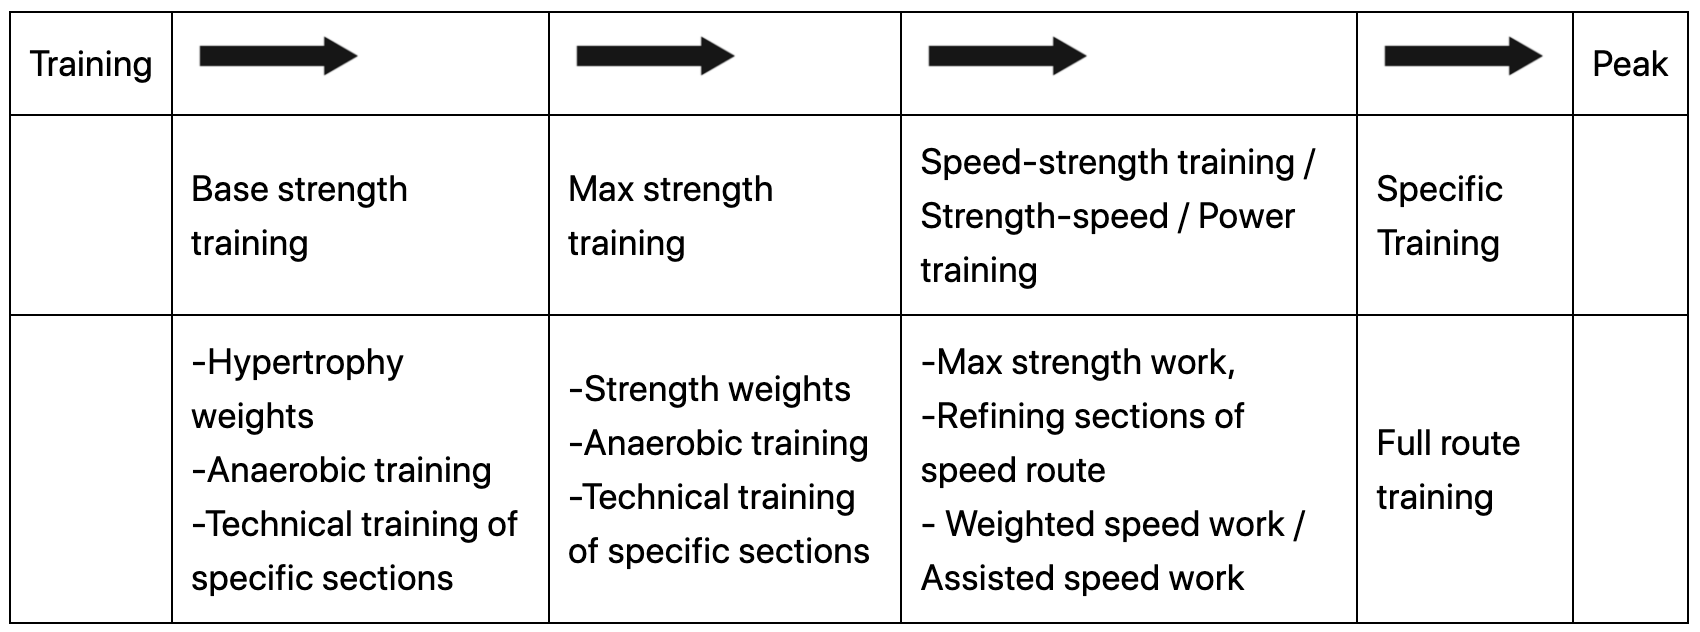 Timeline for Training Power before peak performance for a seed climber